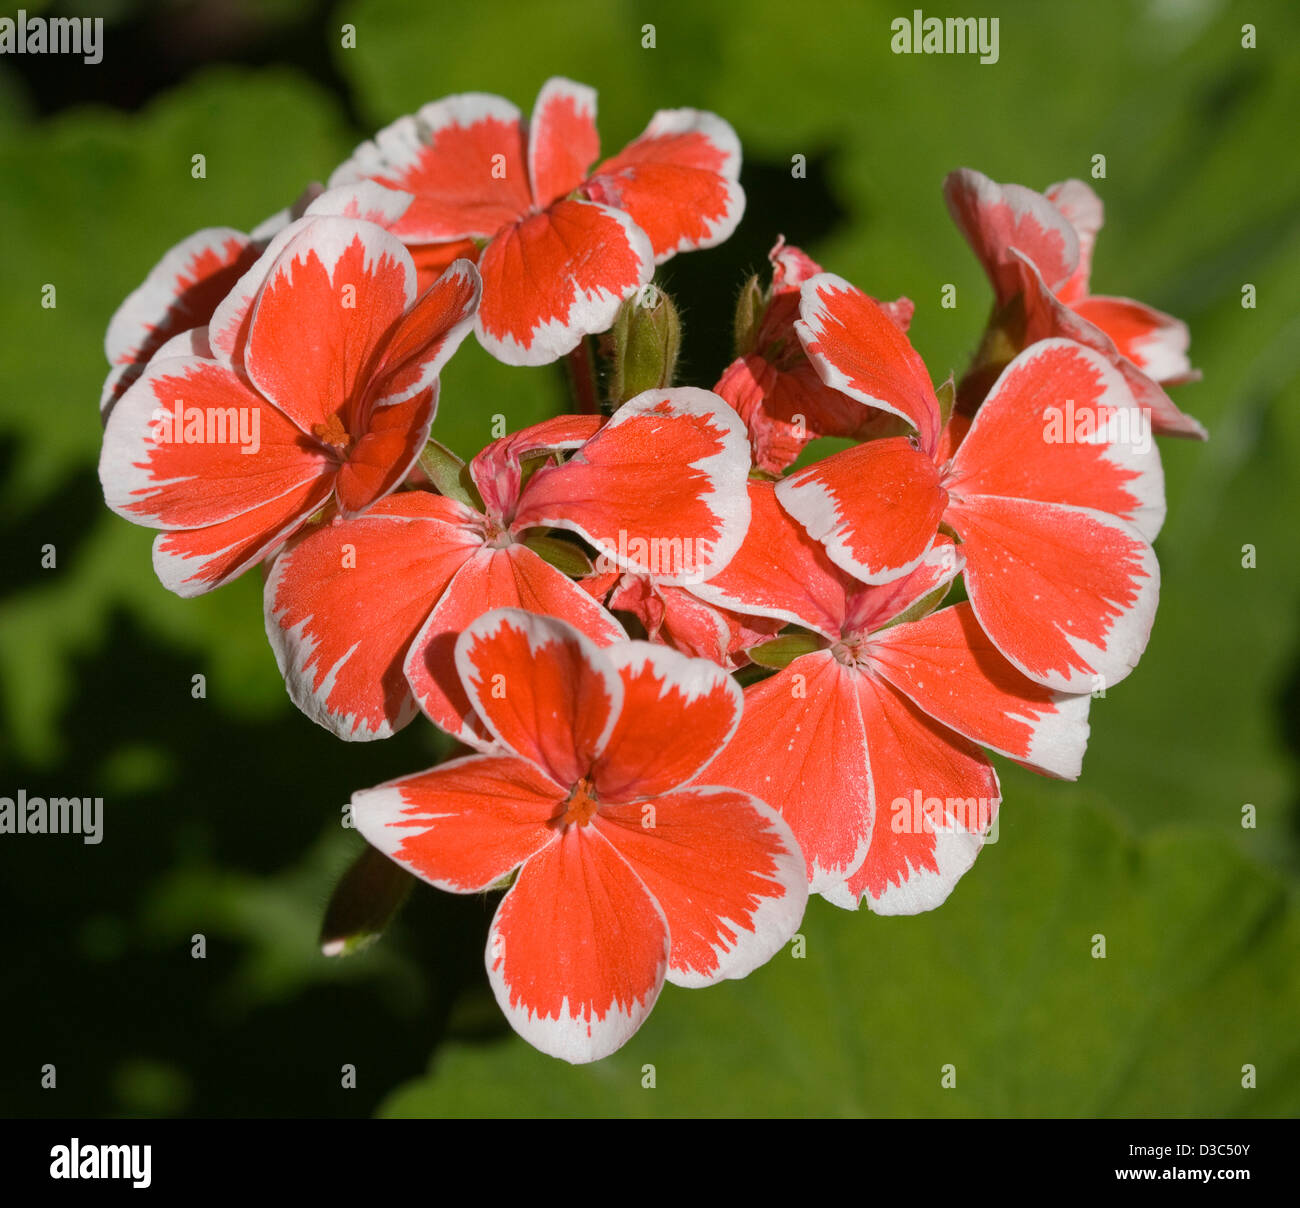 Cluster of bright orange / red and white flowers of Geranium cultivar 'Mr. Wren' against a light green background Stock Photo